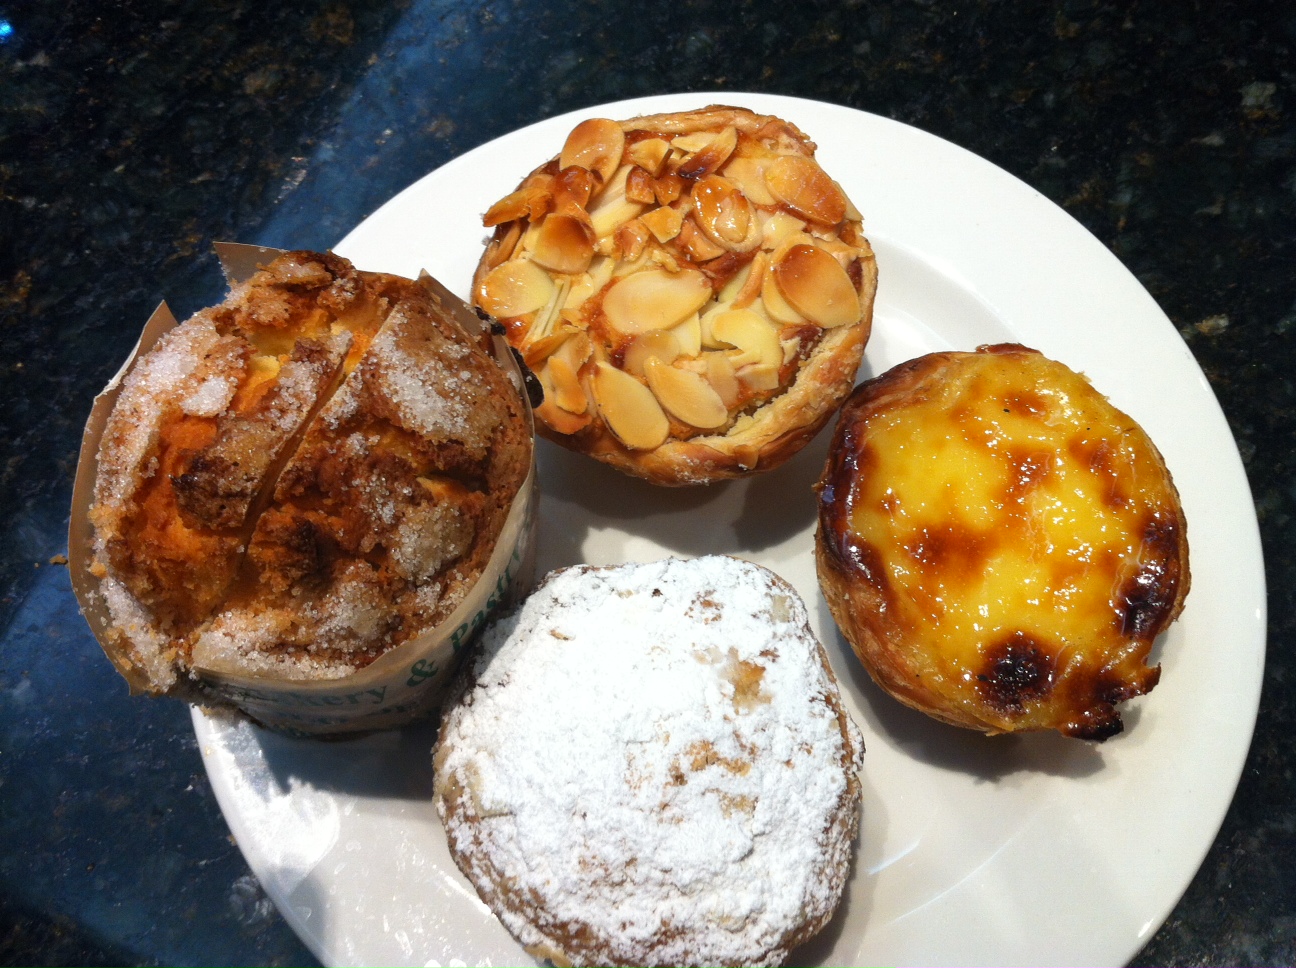 portugeuse pastries 3